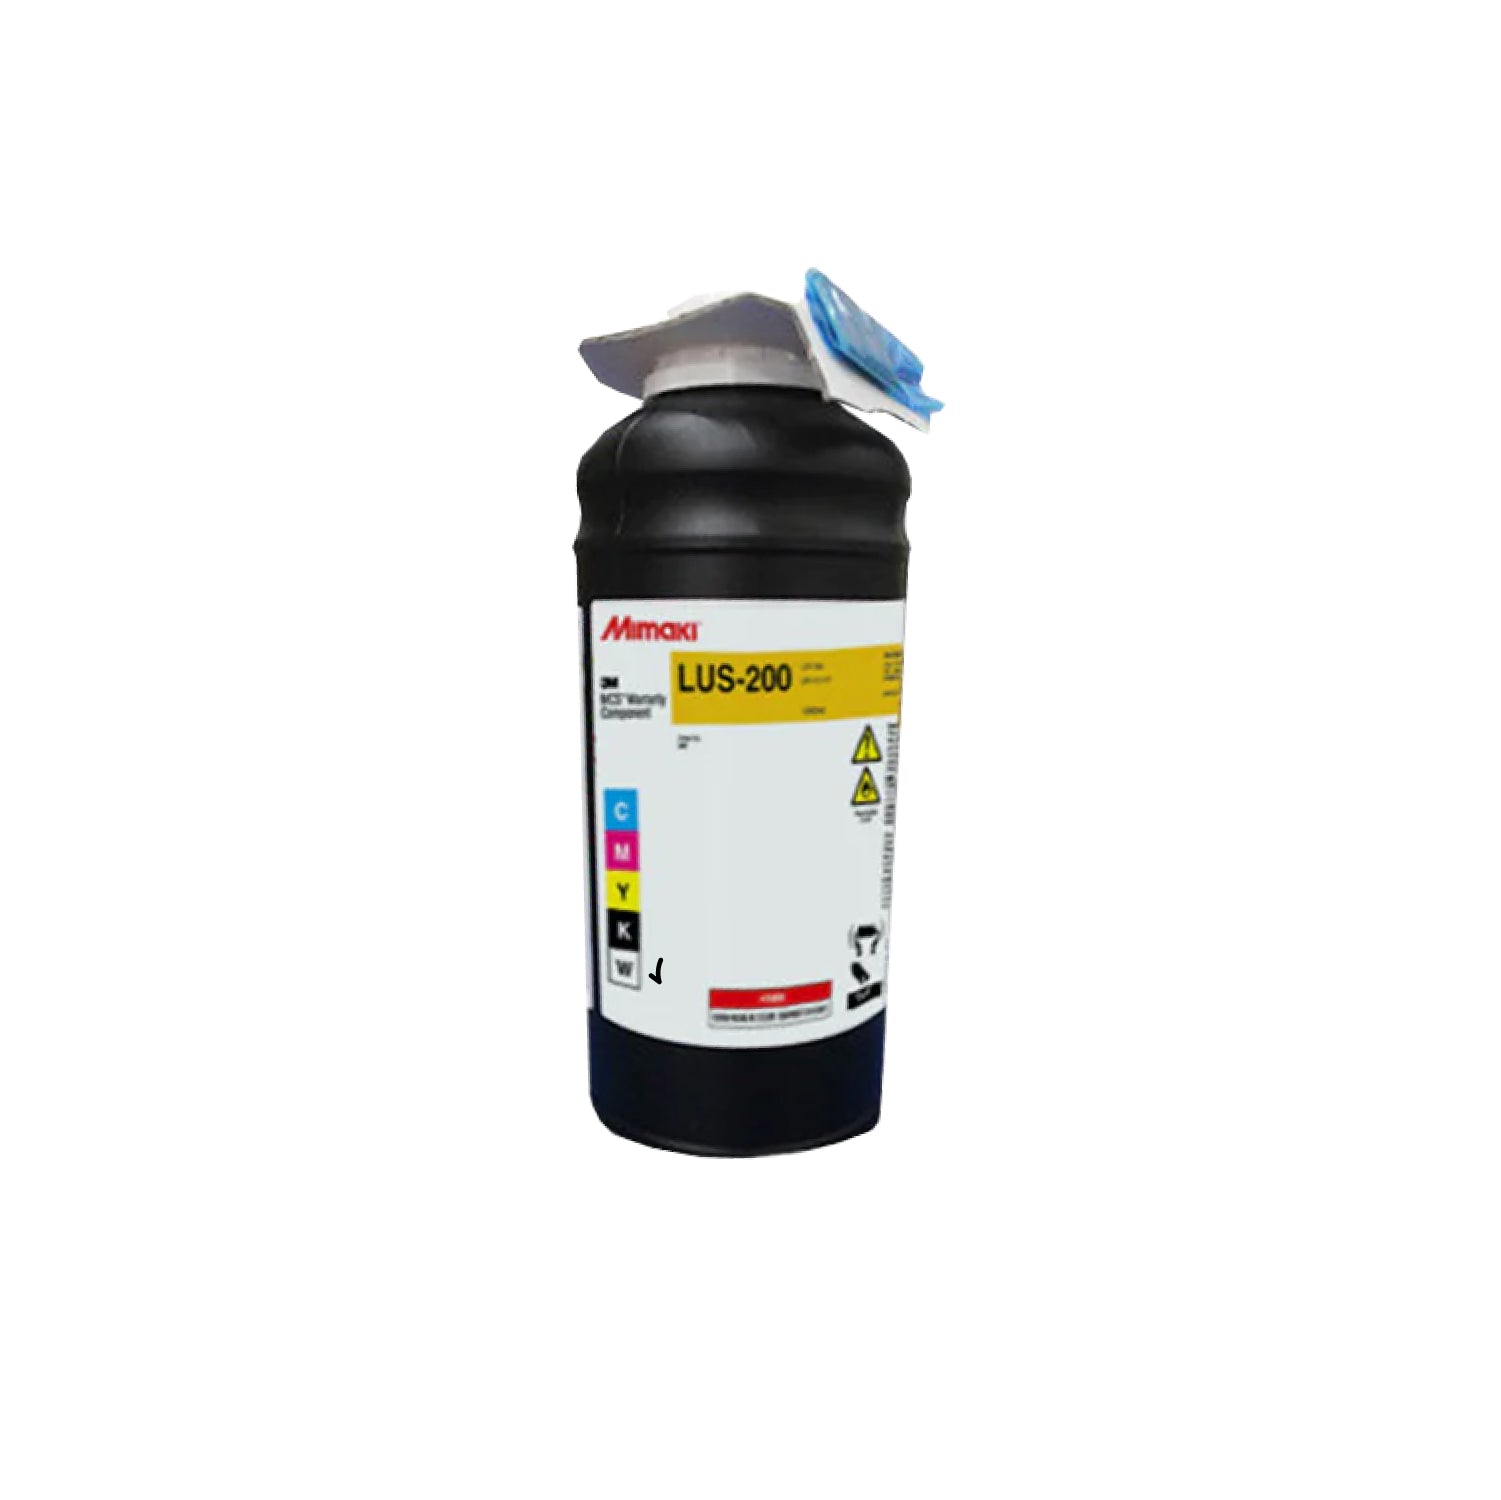 A 1000ml bottle of 3M certified white LUS-200 Mimaki UV ink